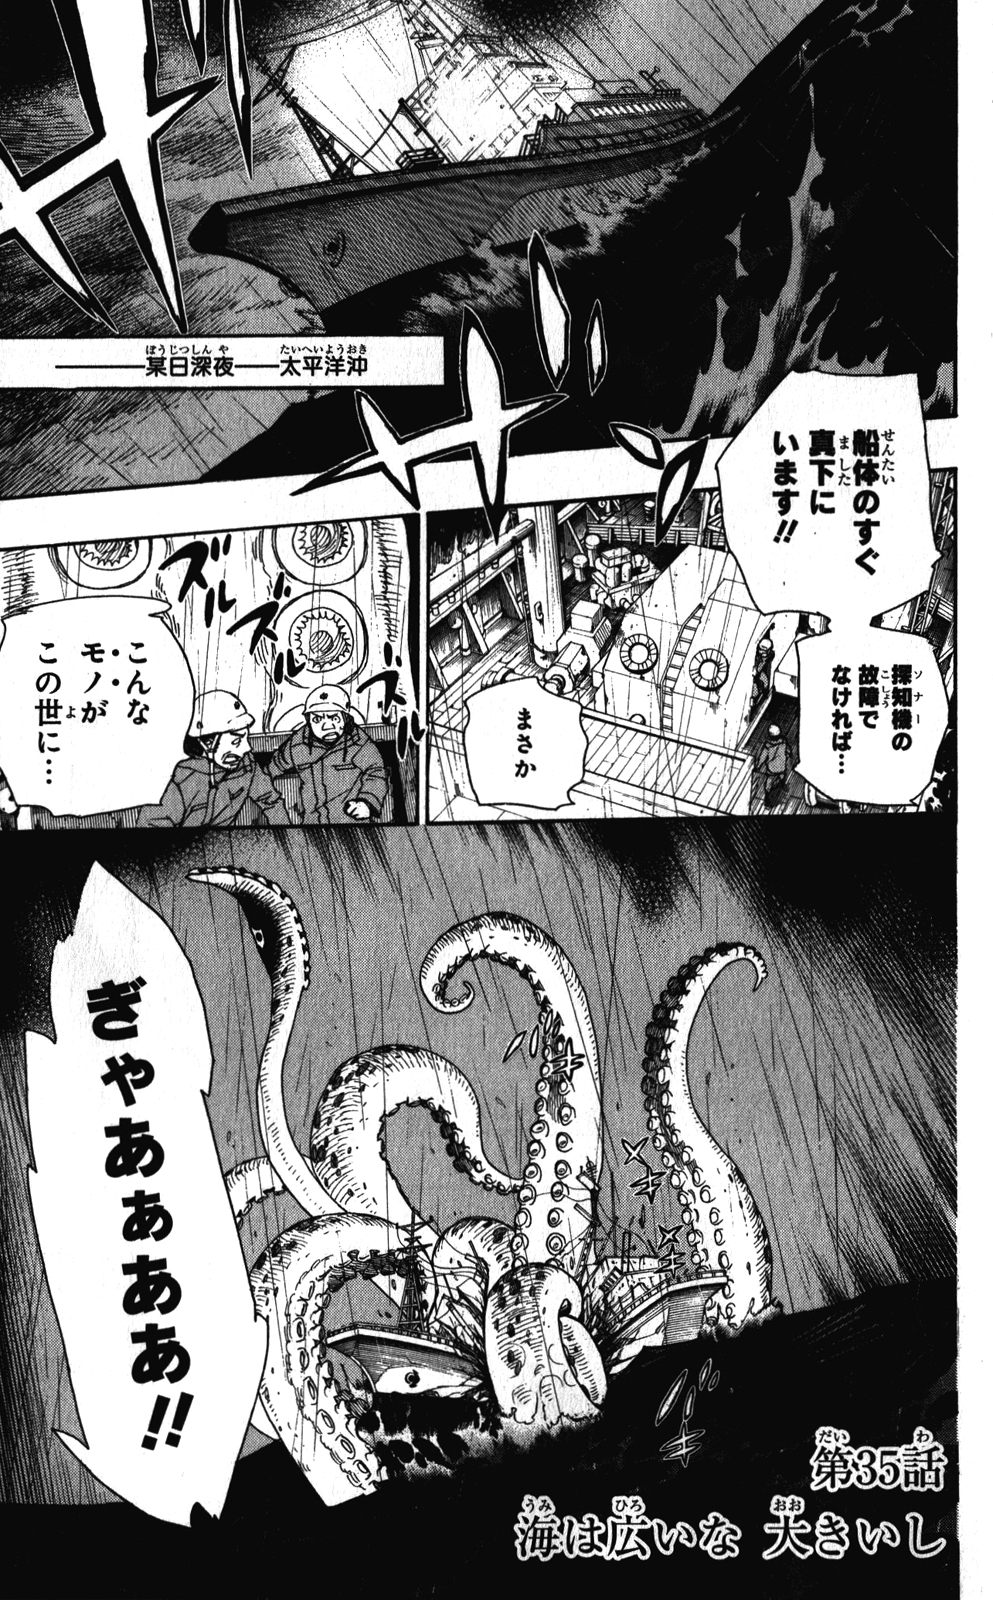 Ao no Exorcist - Chapter 35 - Page 1